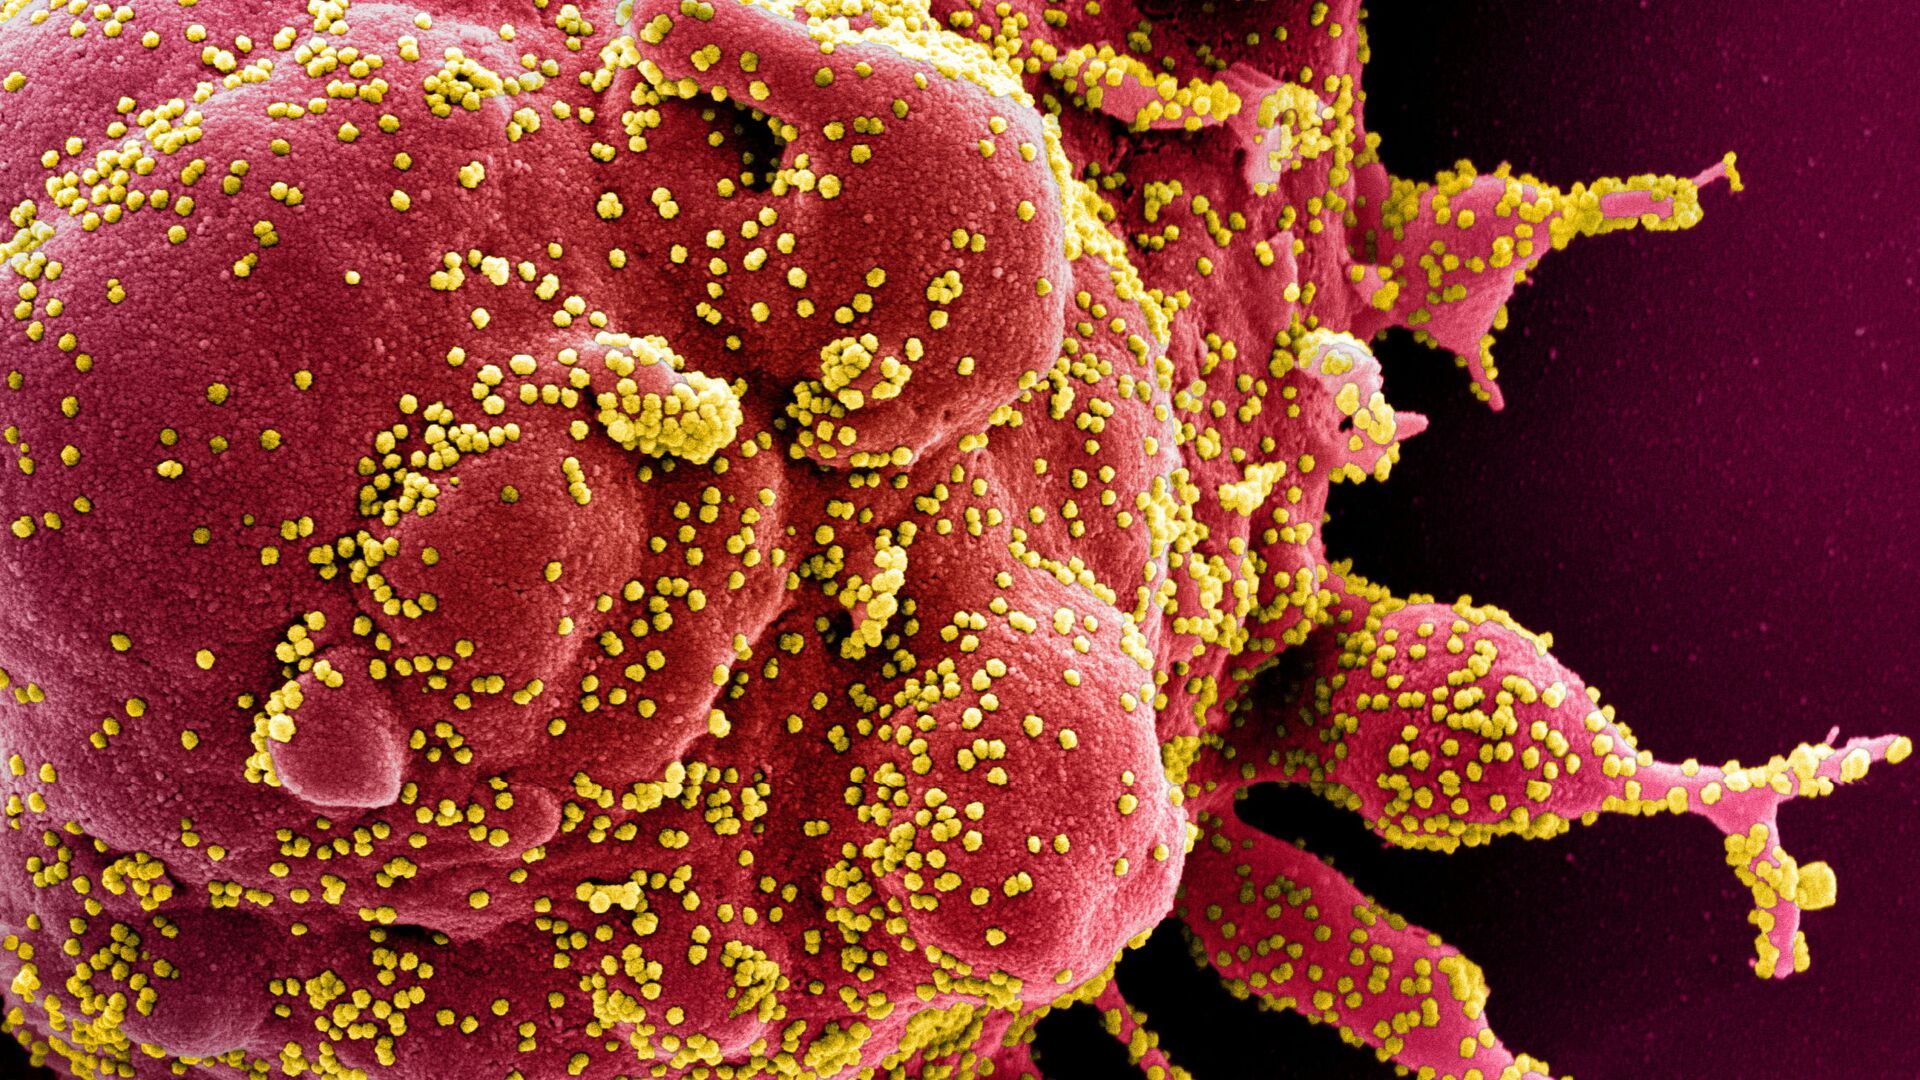 Colorized scanning electron micrograph of an apoptotic cell (red) infected with SARS-COV-2 virus particles (yellow), also known as novel coronavirus, isolated from a patient sample. Image captured at the NIAID Integrated Research Facility (IRF) in Fort Detrick, Maryland - Sputnik International, 1920, 28.12.2021